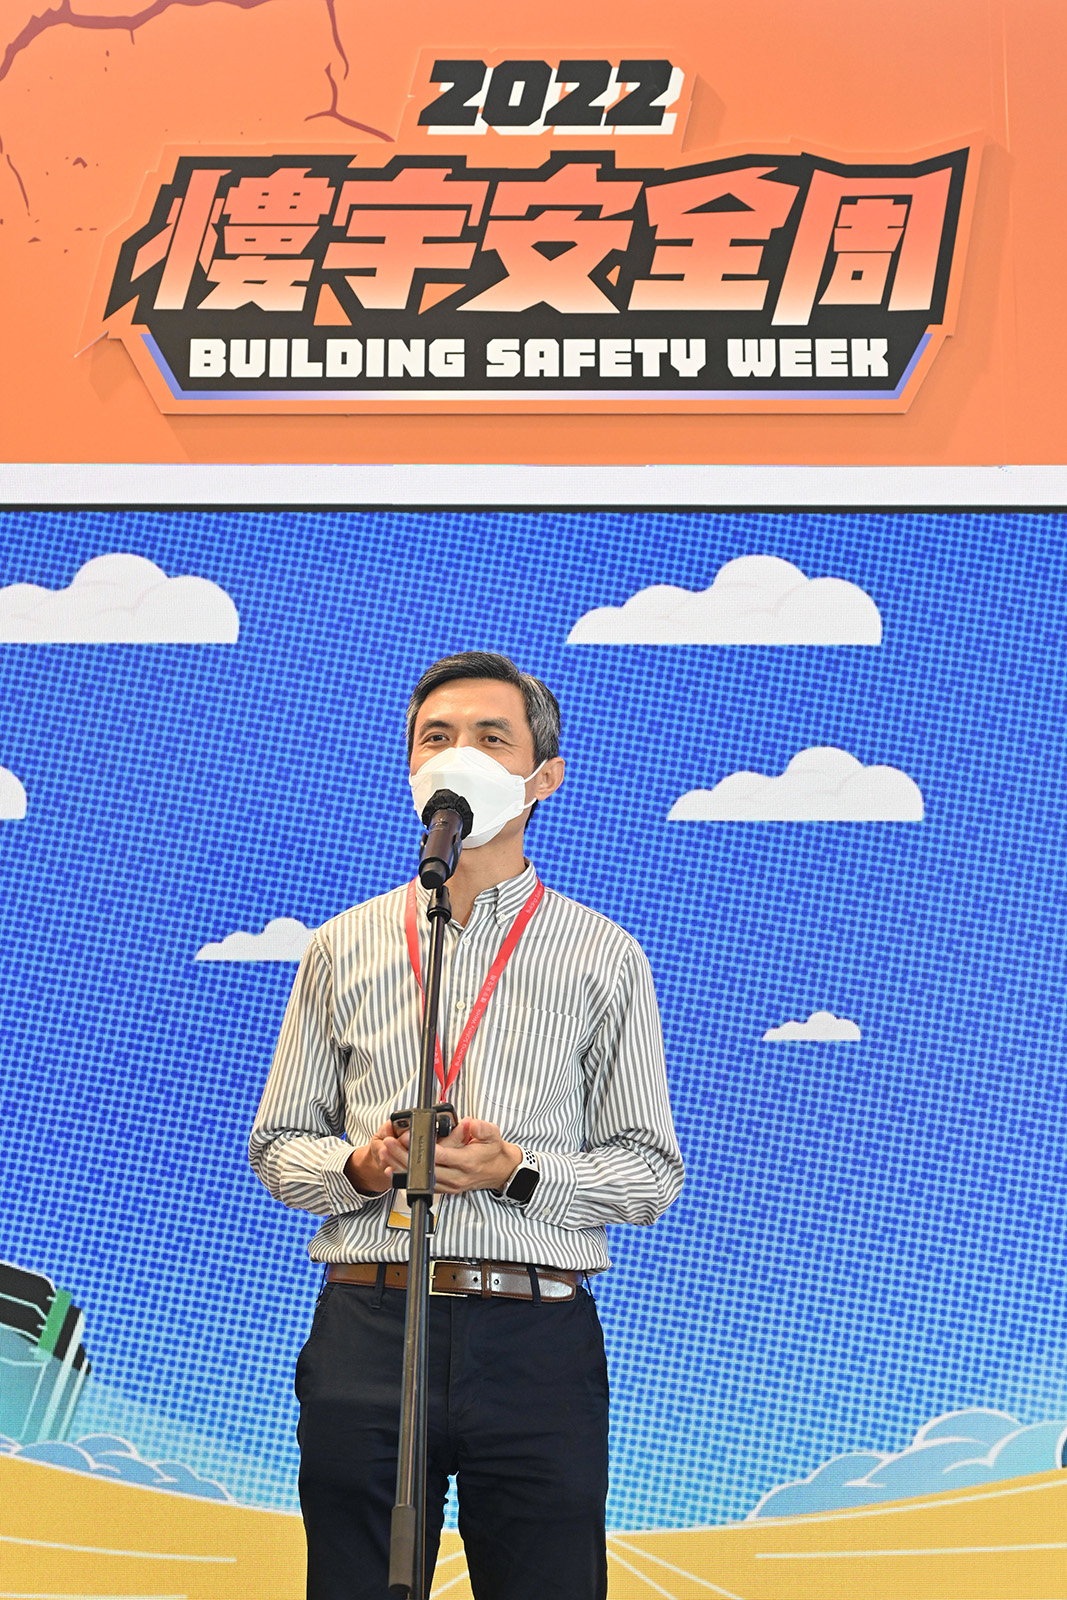 Building Safety Week 2022